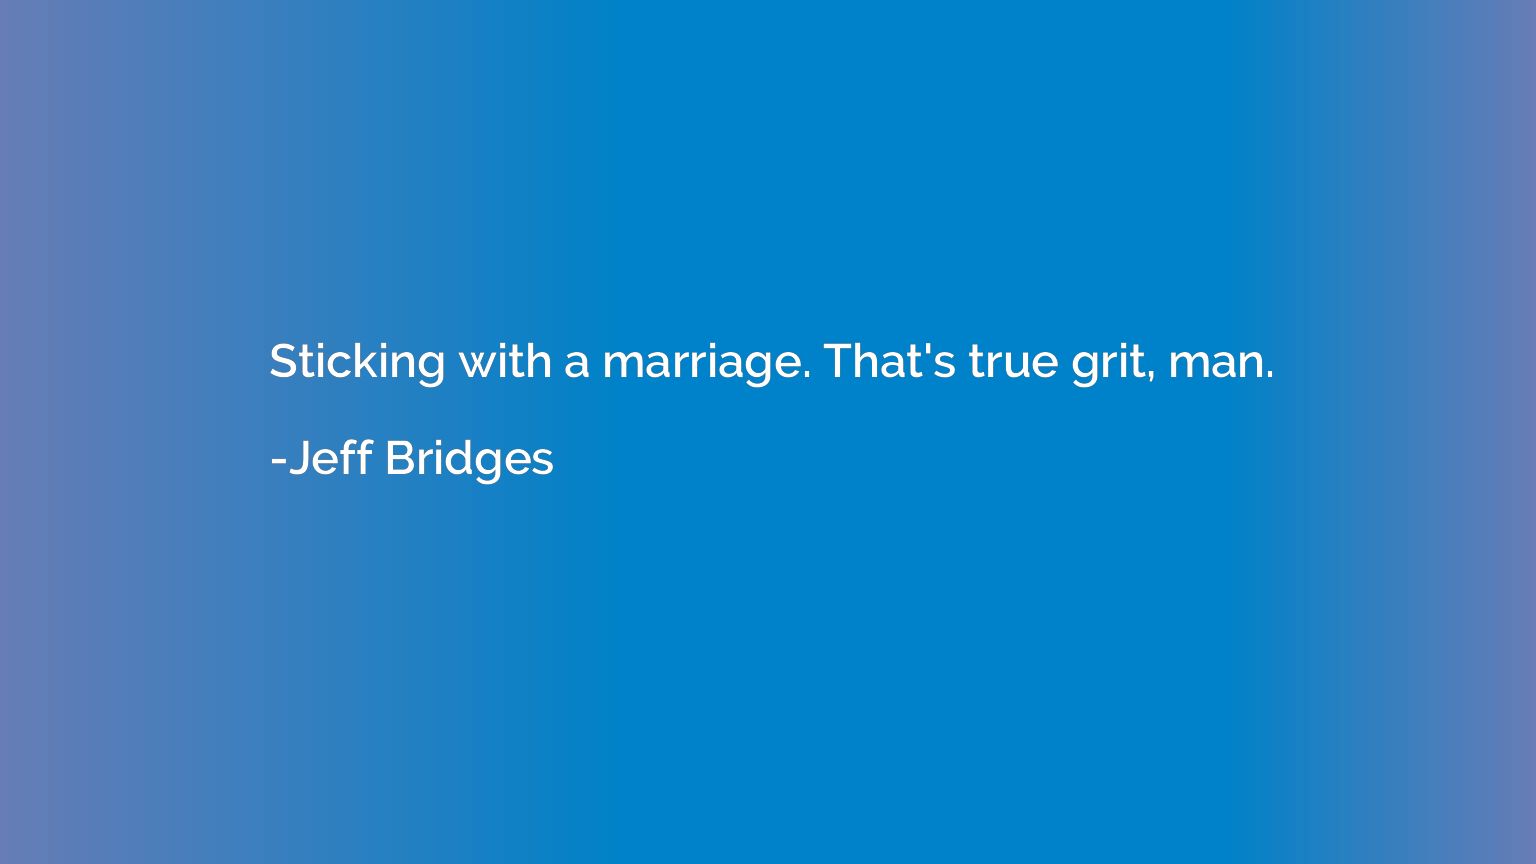 Sticking with a marriage. That's true grit, man.